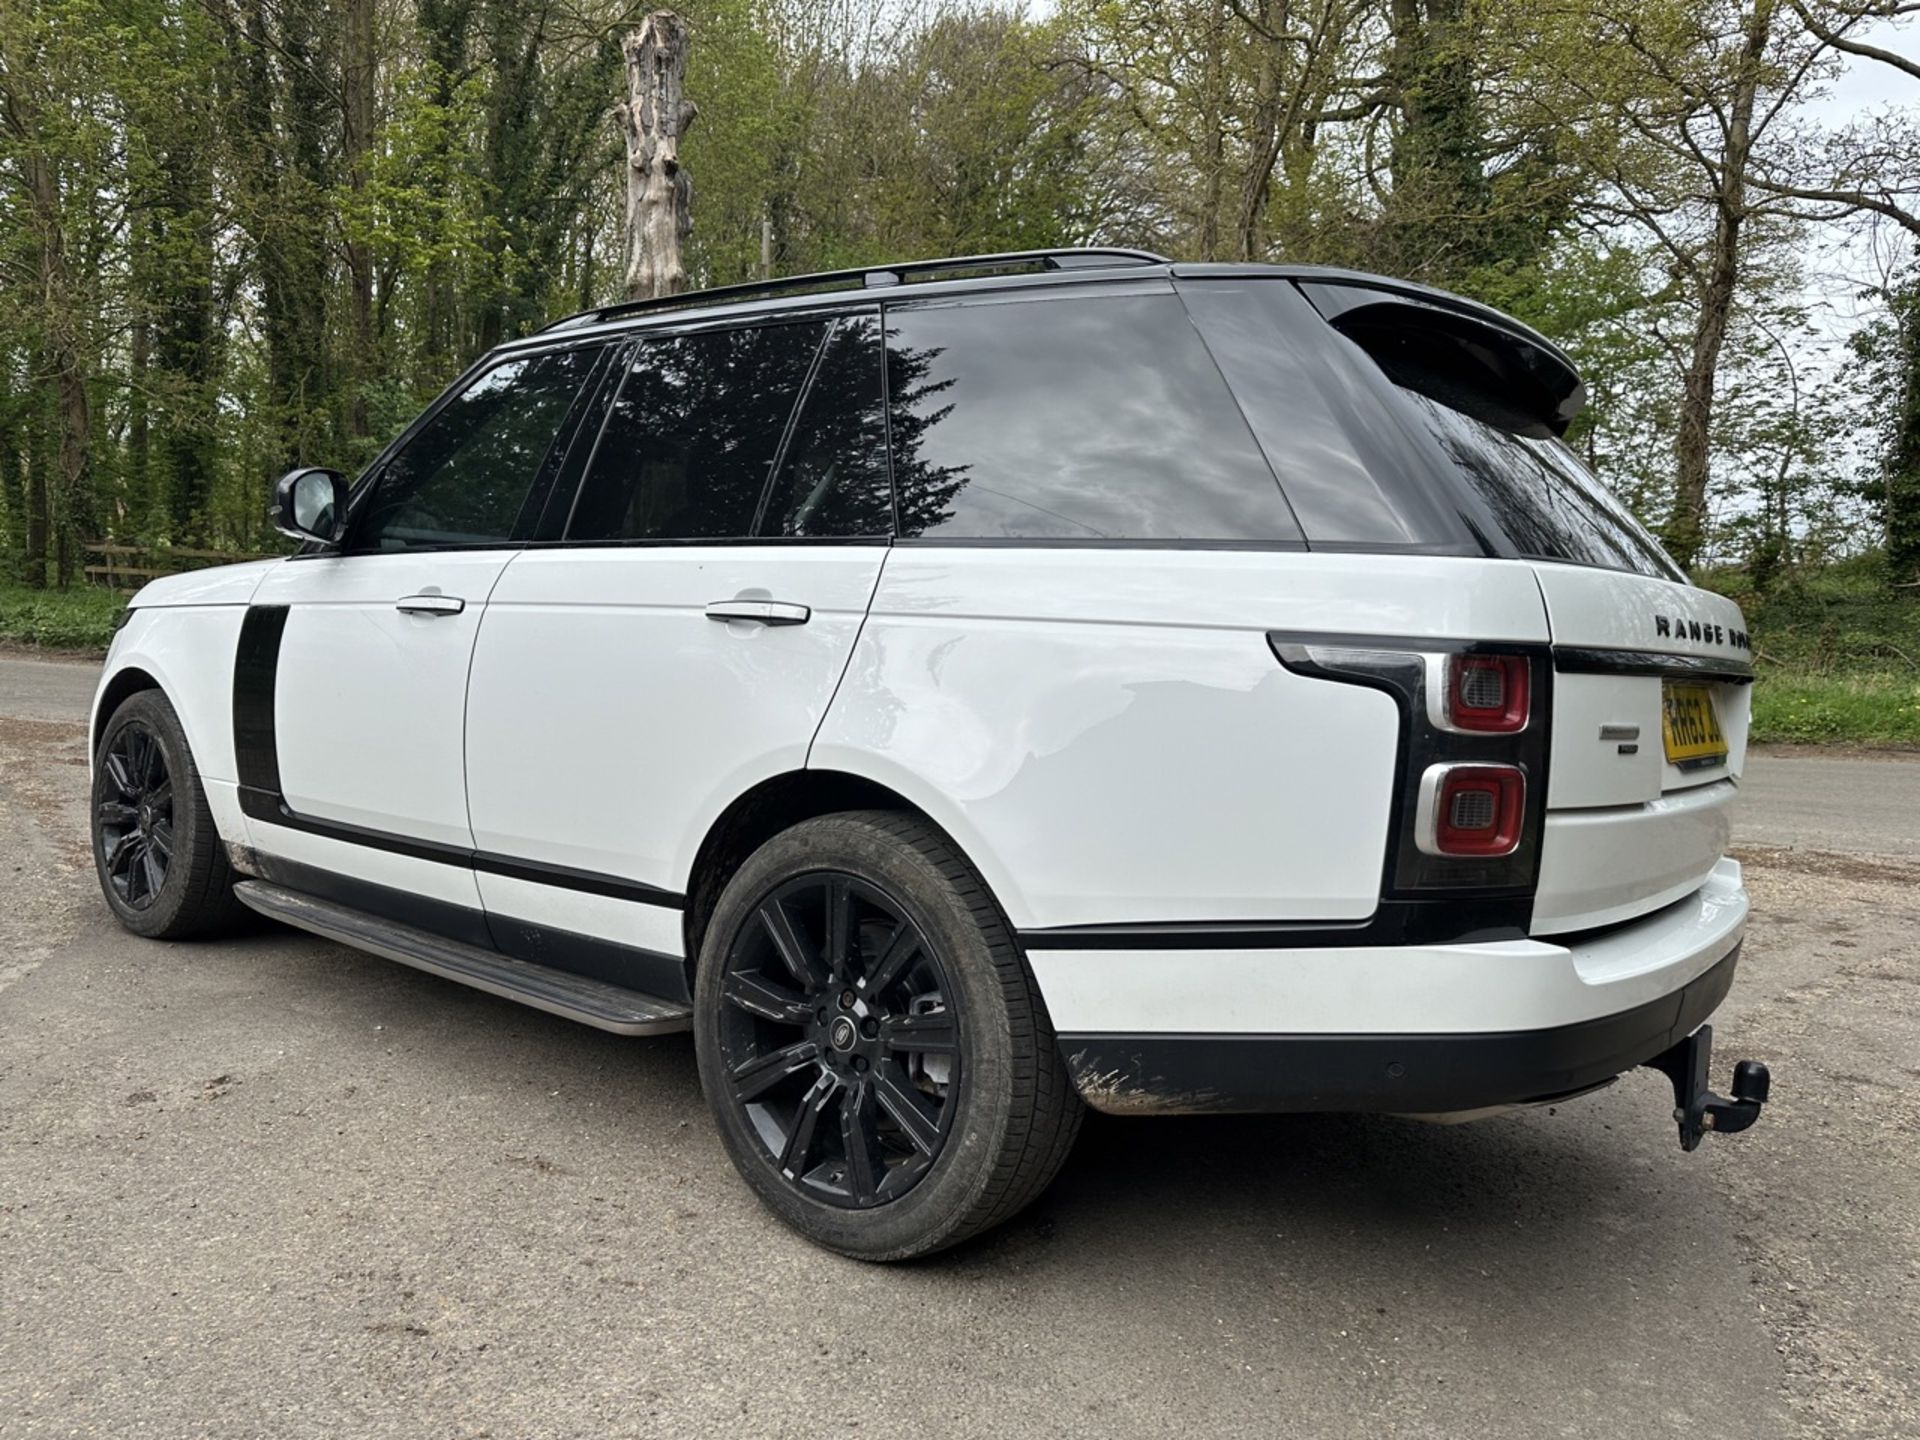 LAND ROVER RANGE ROVER 2.0 P400e Autobiography 4dr Auto - Automatic - 2018 - 31k miles - FULL SH - Image 7 of 17